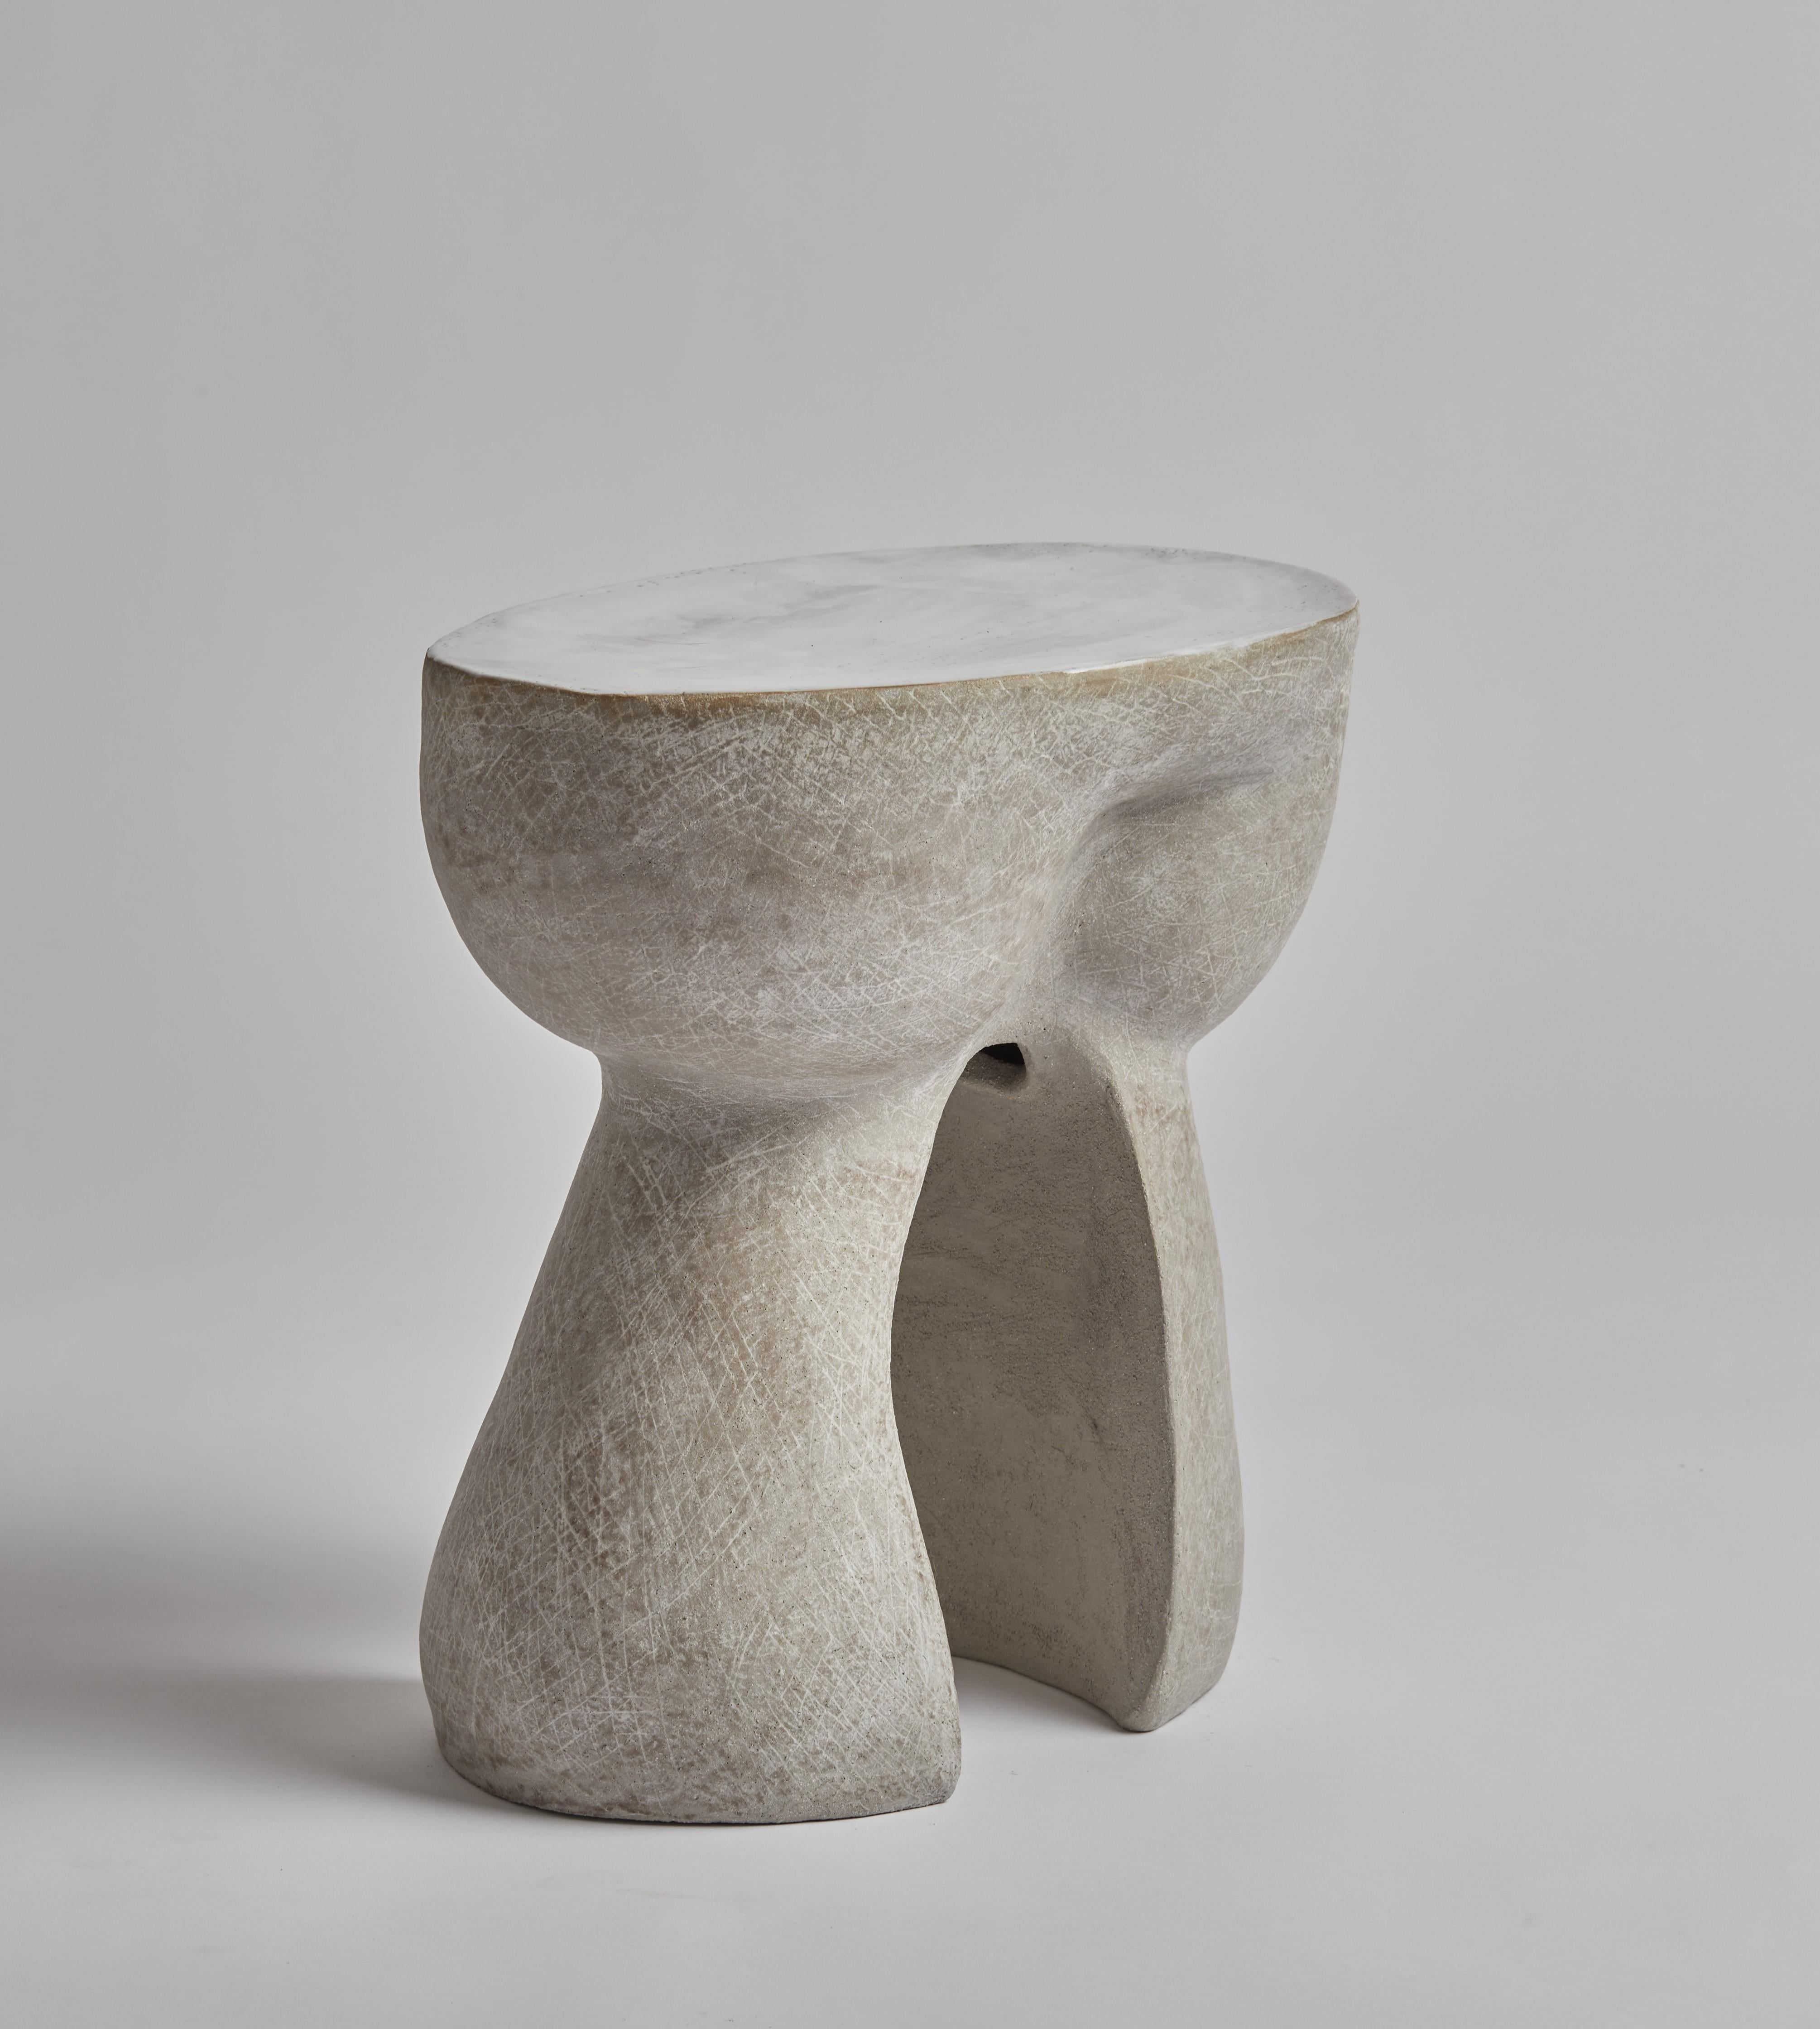 This side table is hand crafted by the creator from a grey stoneware clay.  Inspired by the sensual curves of Jean Hans Arp's sculpture Kerry Hastings builds her forms using the ancient technique of coiling with ropes of clay.  This piece has then